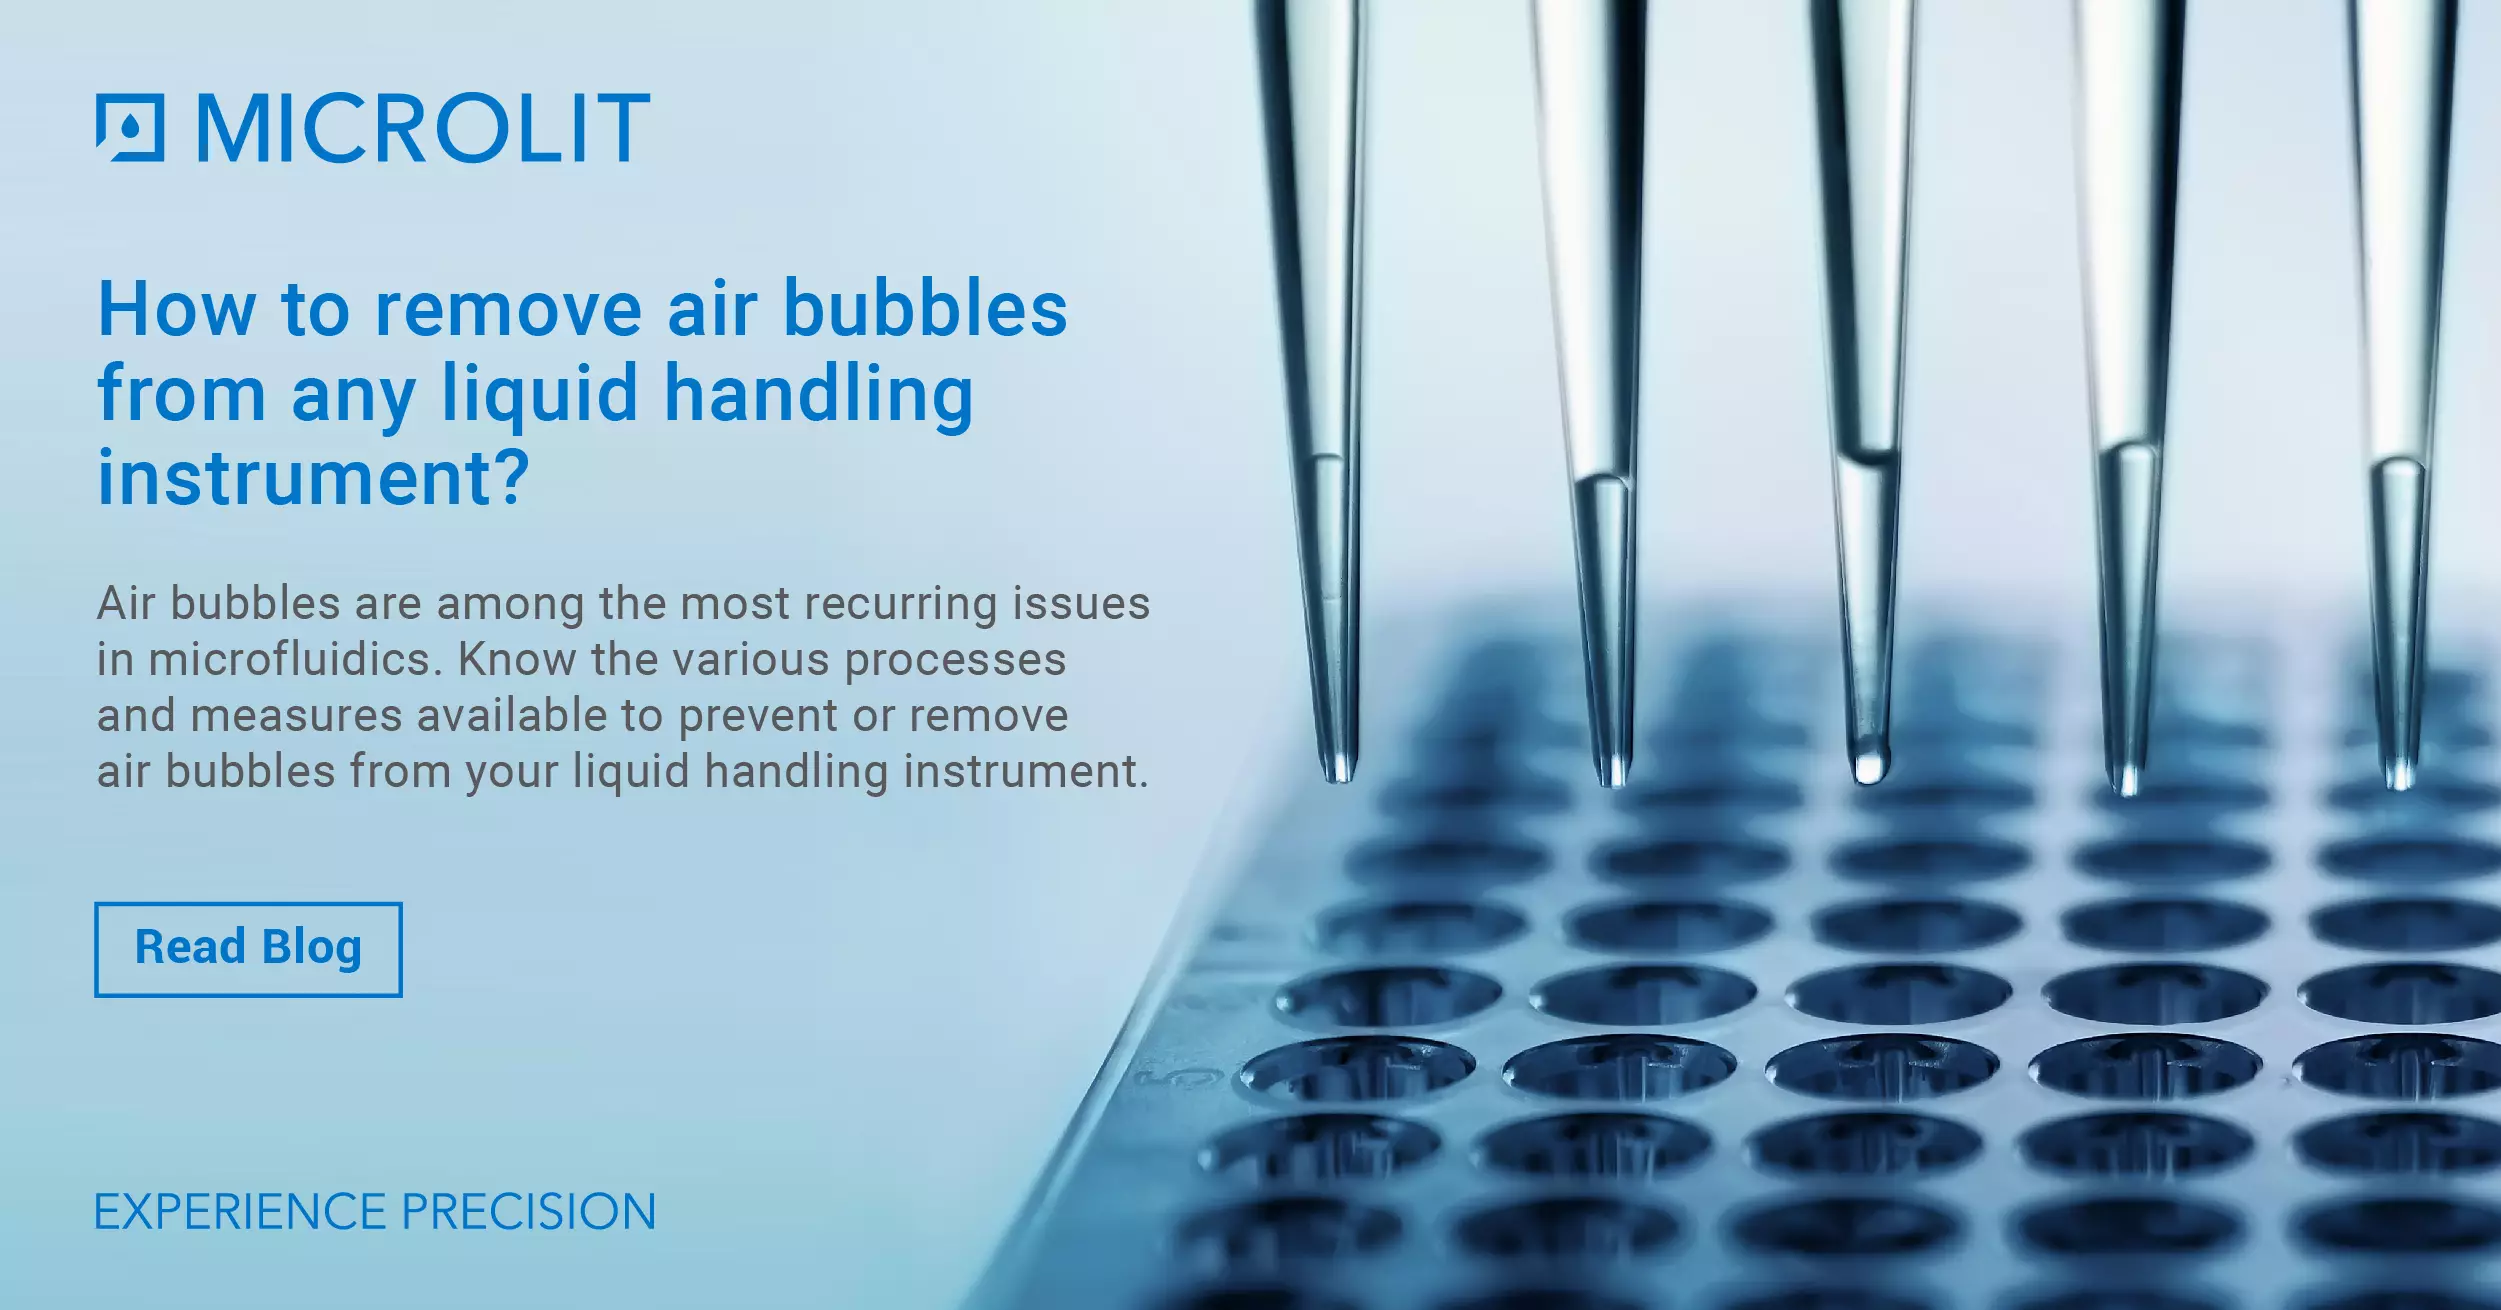 How to remove air bubbles from any liquid handling instrument?